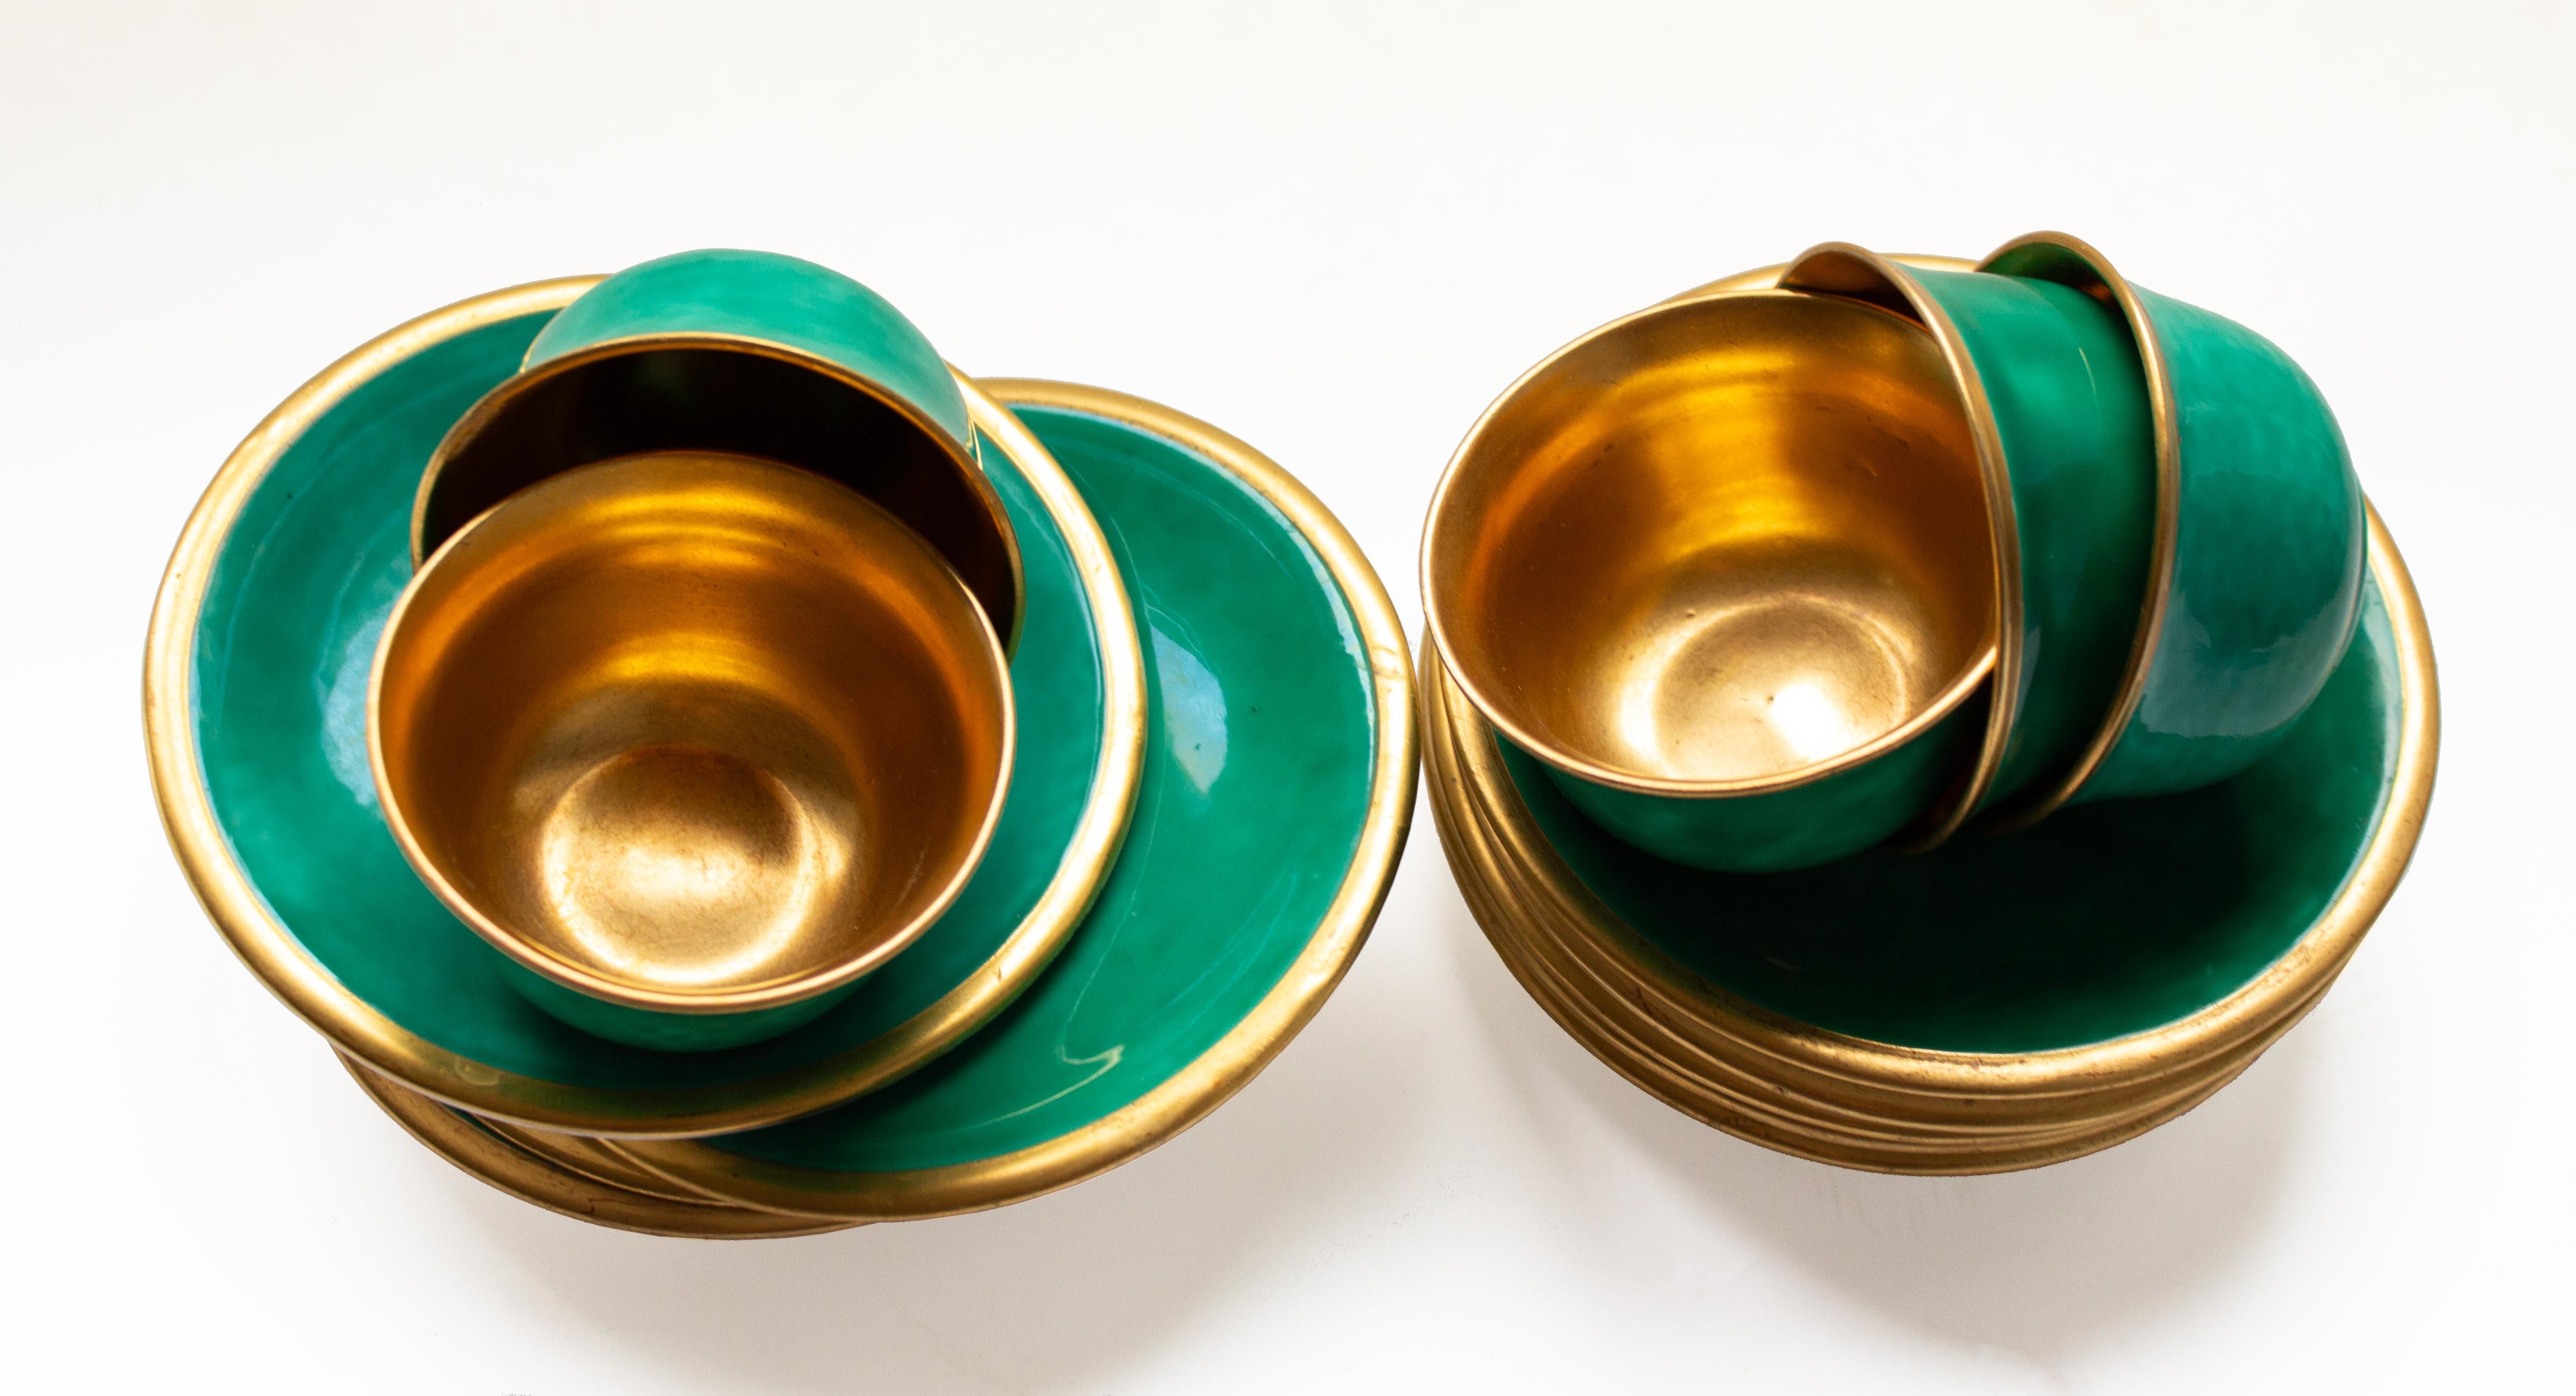 16 Scandinavian Modern Gilded Chocolate/Espresso Cups by Wilhelm Kåge, Gustavsberg, Made in Sweden. Green enamel with interior gilding.

The gilded details on the espresso cups give them a sophisticated and luxurious look and they never go out of